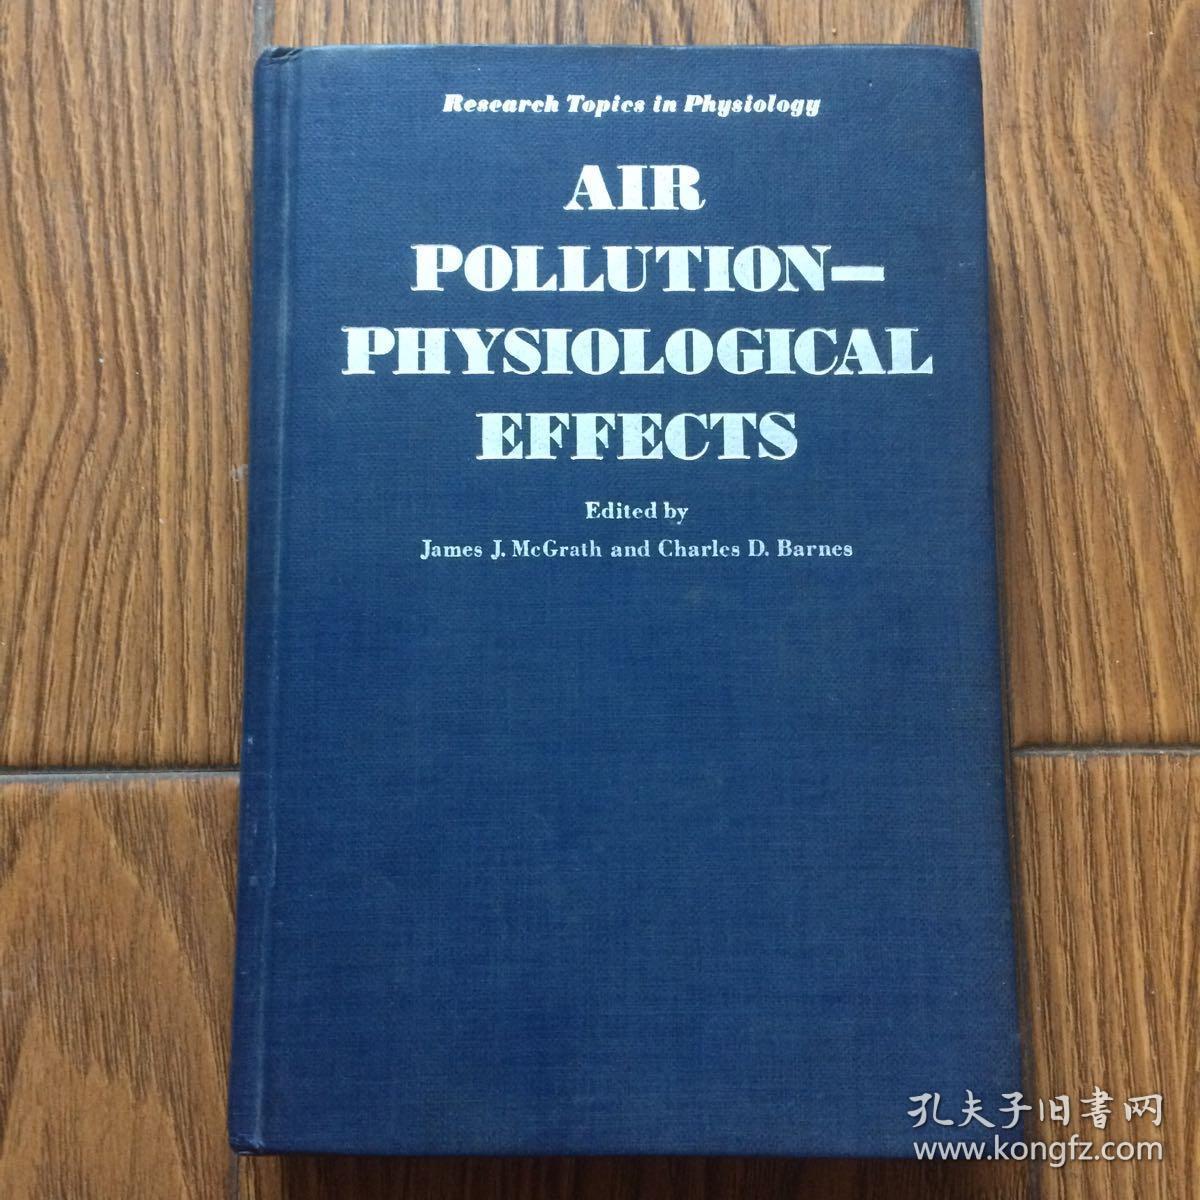 Air Pollution-Physiological Effects